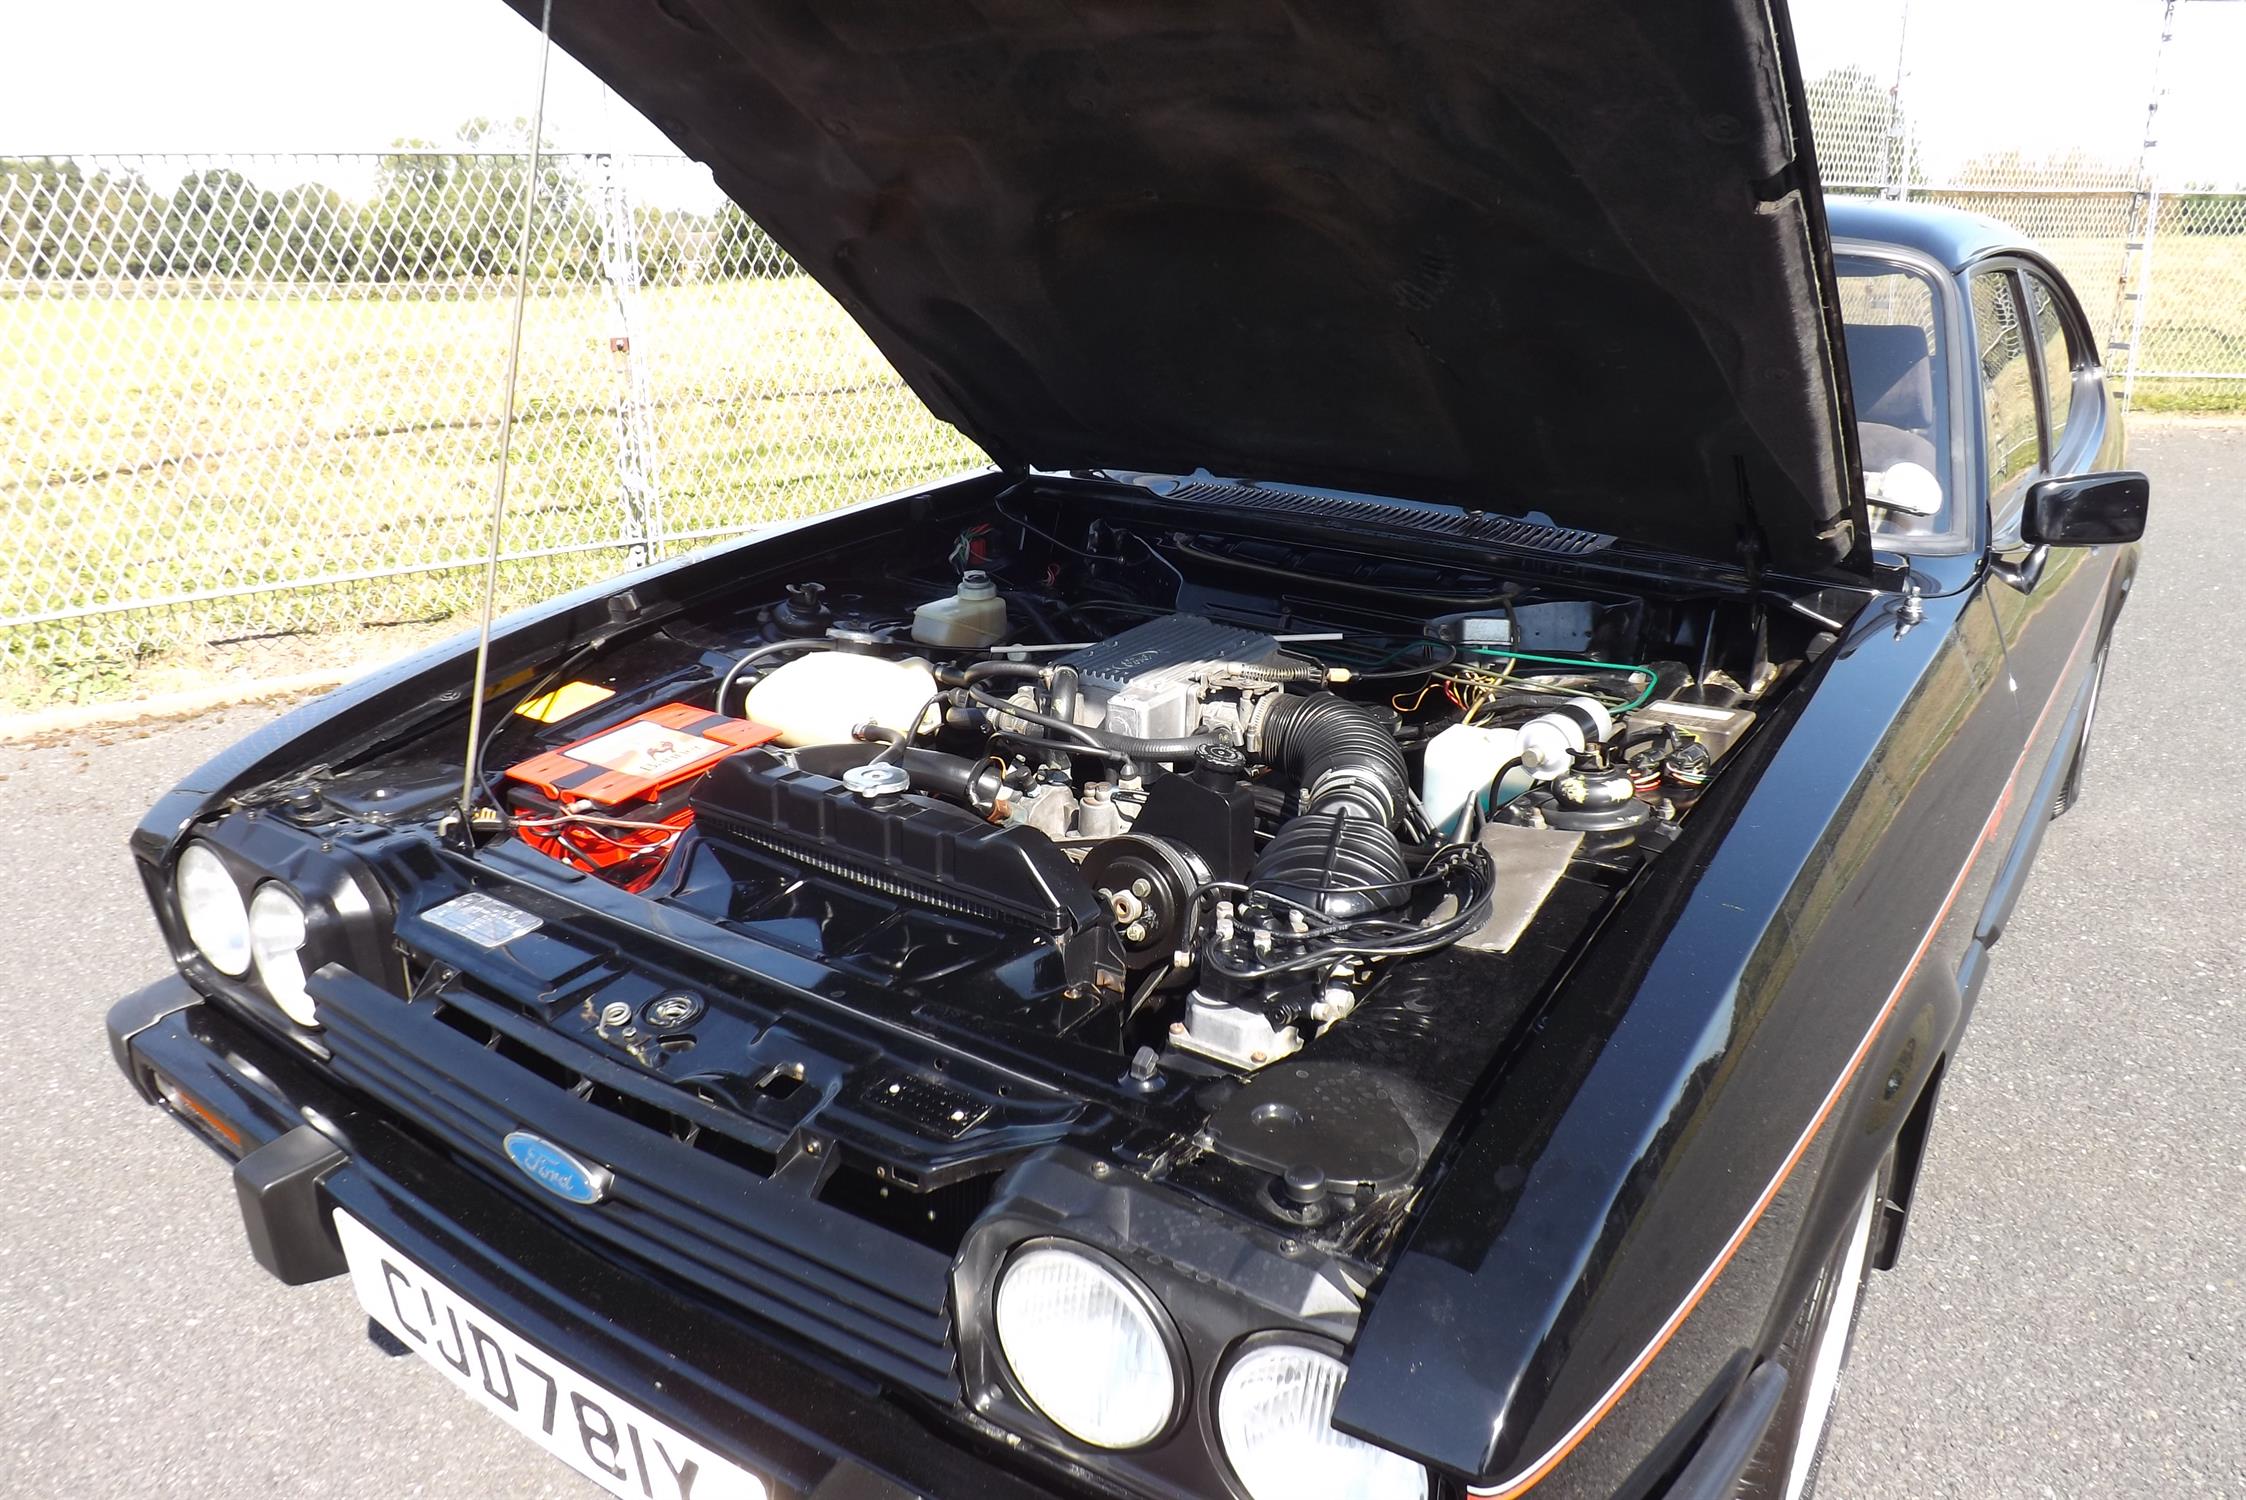 1982 Ford Capri Mk 3 2.8 Injection - Image 10 of 10